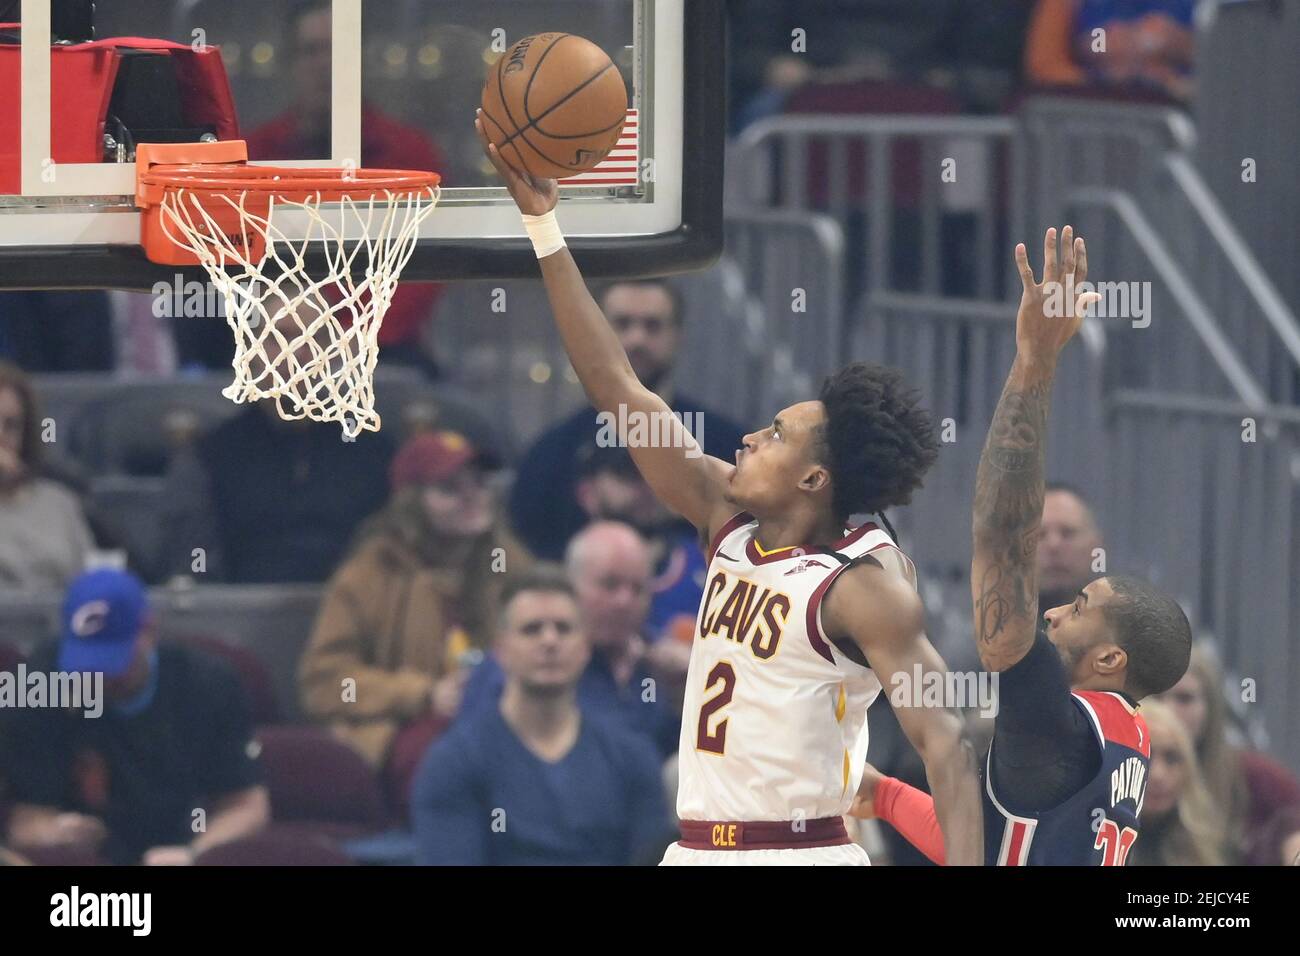 Jan 23, 2020; Cleveland, Ohio, USA; Cleveland Cavaliers guard Collin Sexton (2) drives against Washington Wizards guard Gary Payton II (20) in the first quarter at Rocket Mortgage FieldHouse. Mandatory Credit: David Richard-USA TODAY Sports/Sipa USA Stock Photo